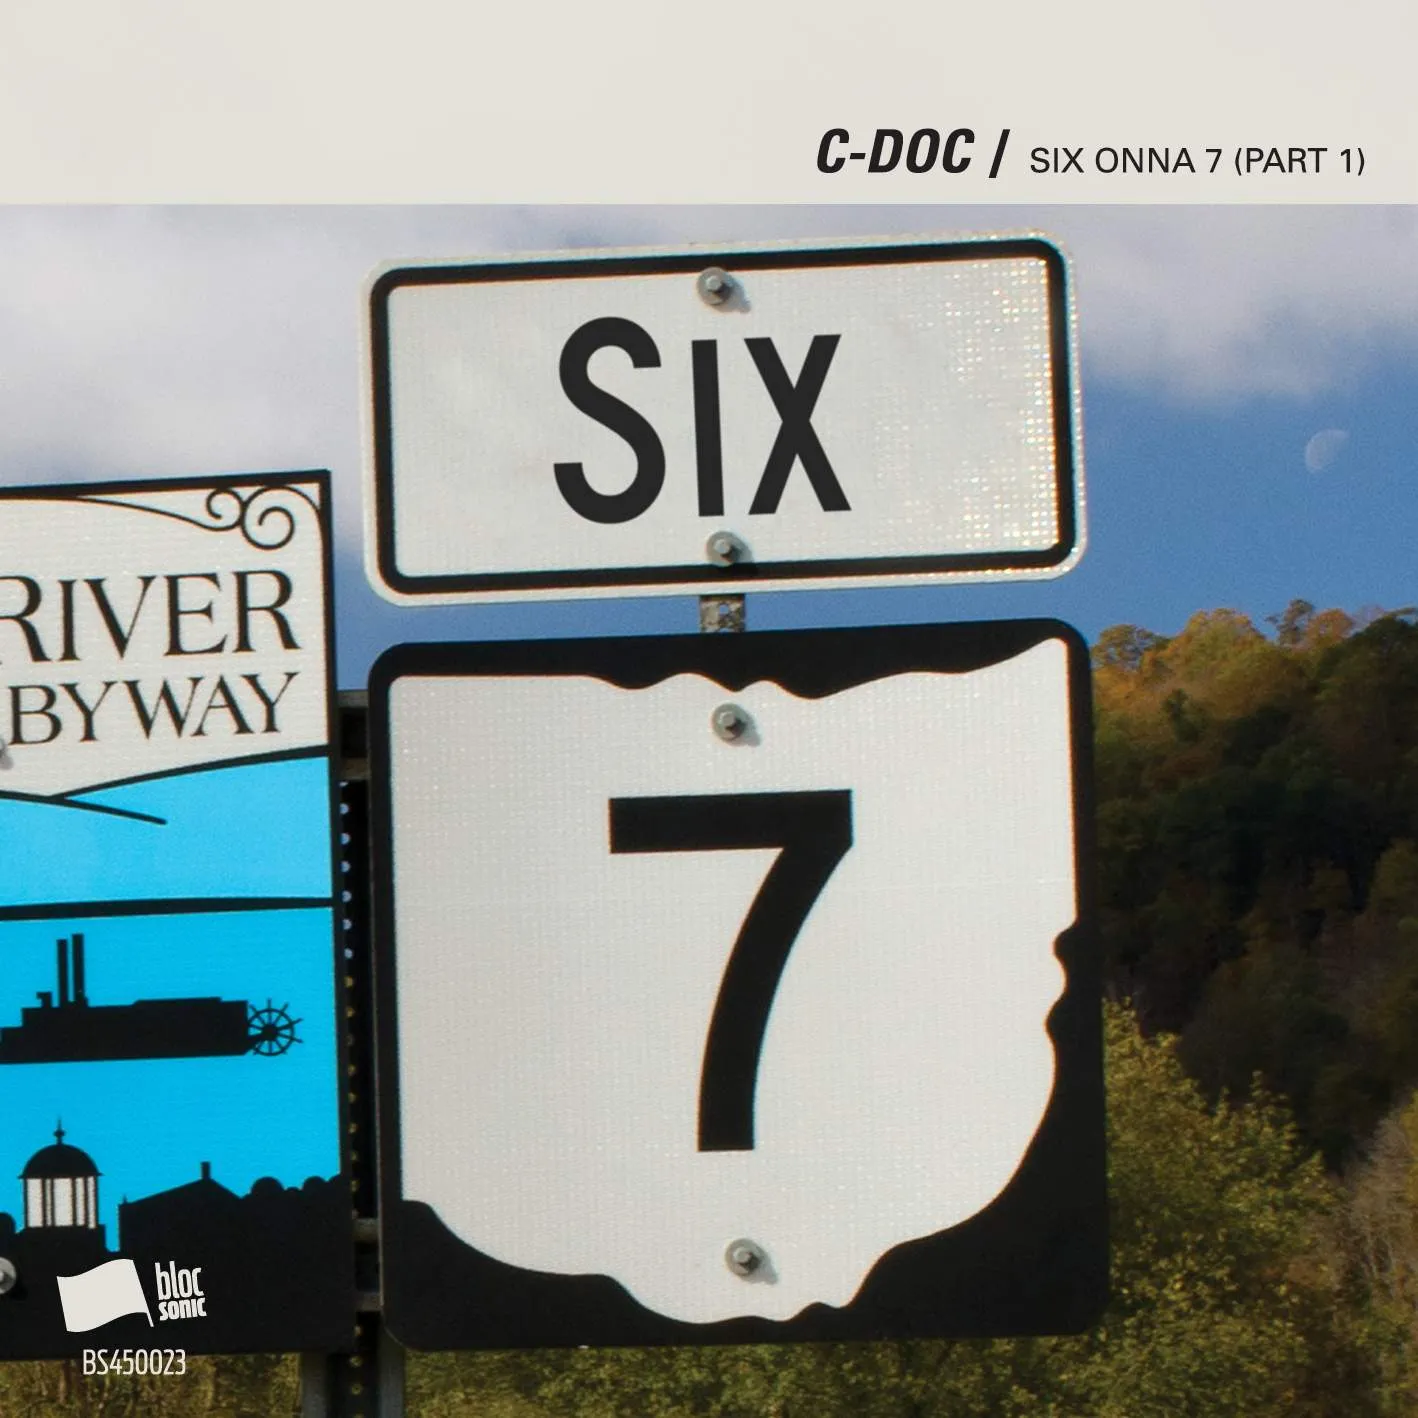 Album cover for “SIX ONNA 7 (Part 1)” by C-Doc